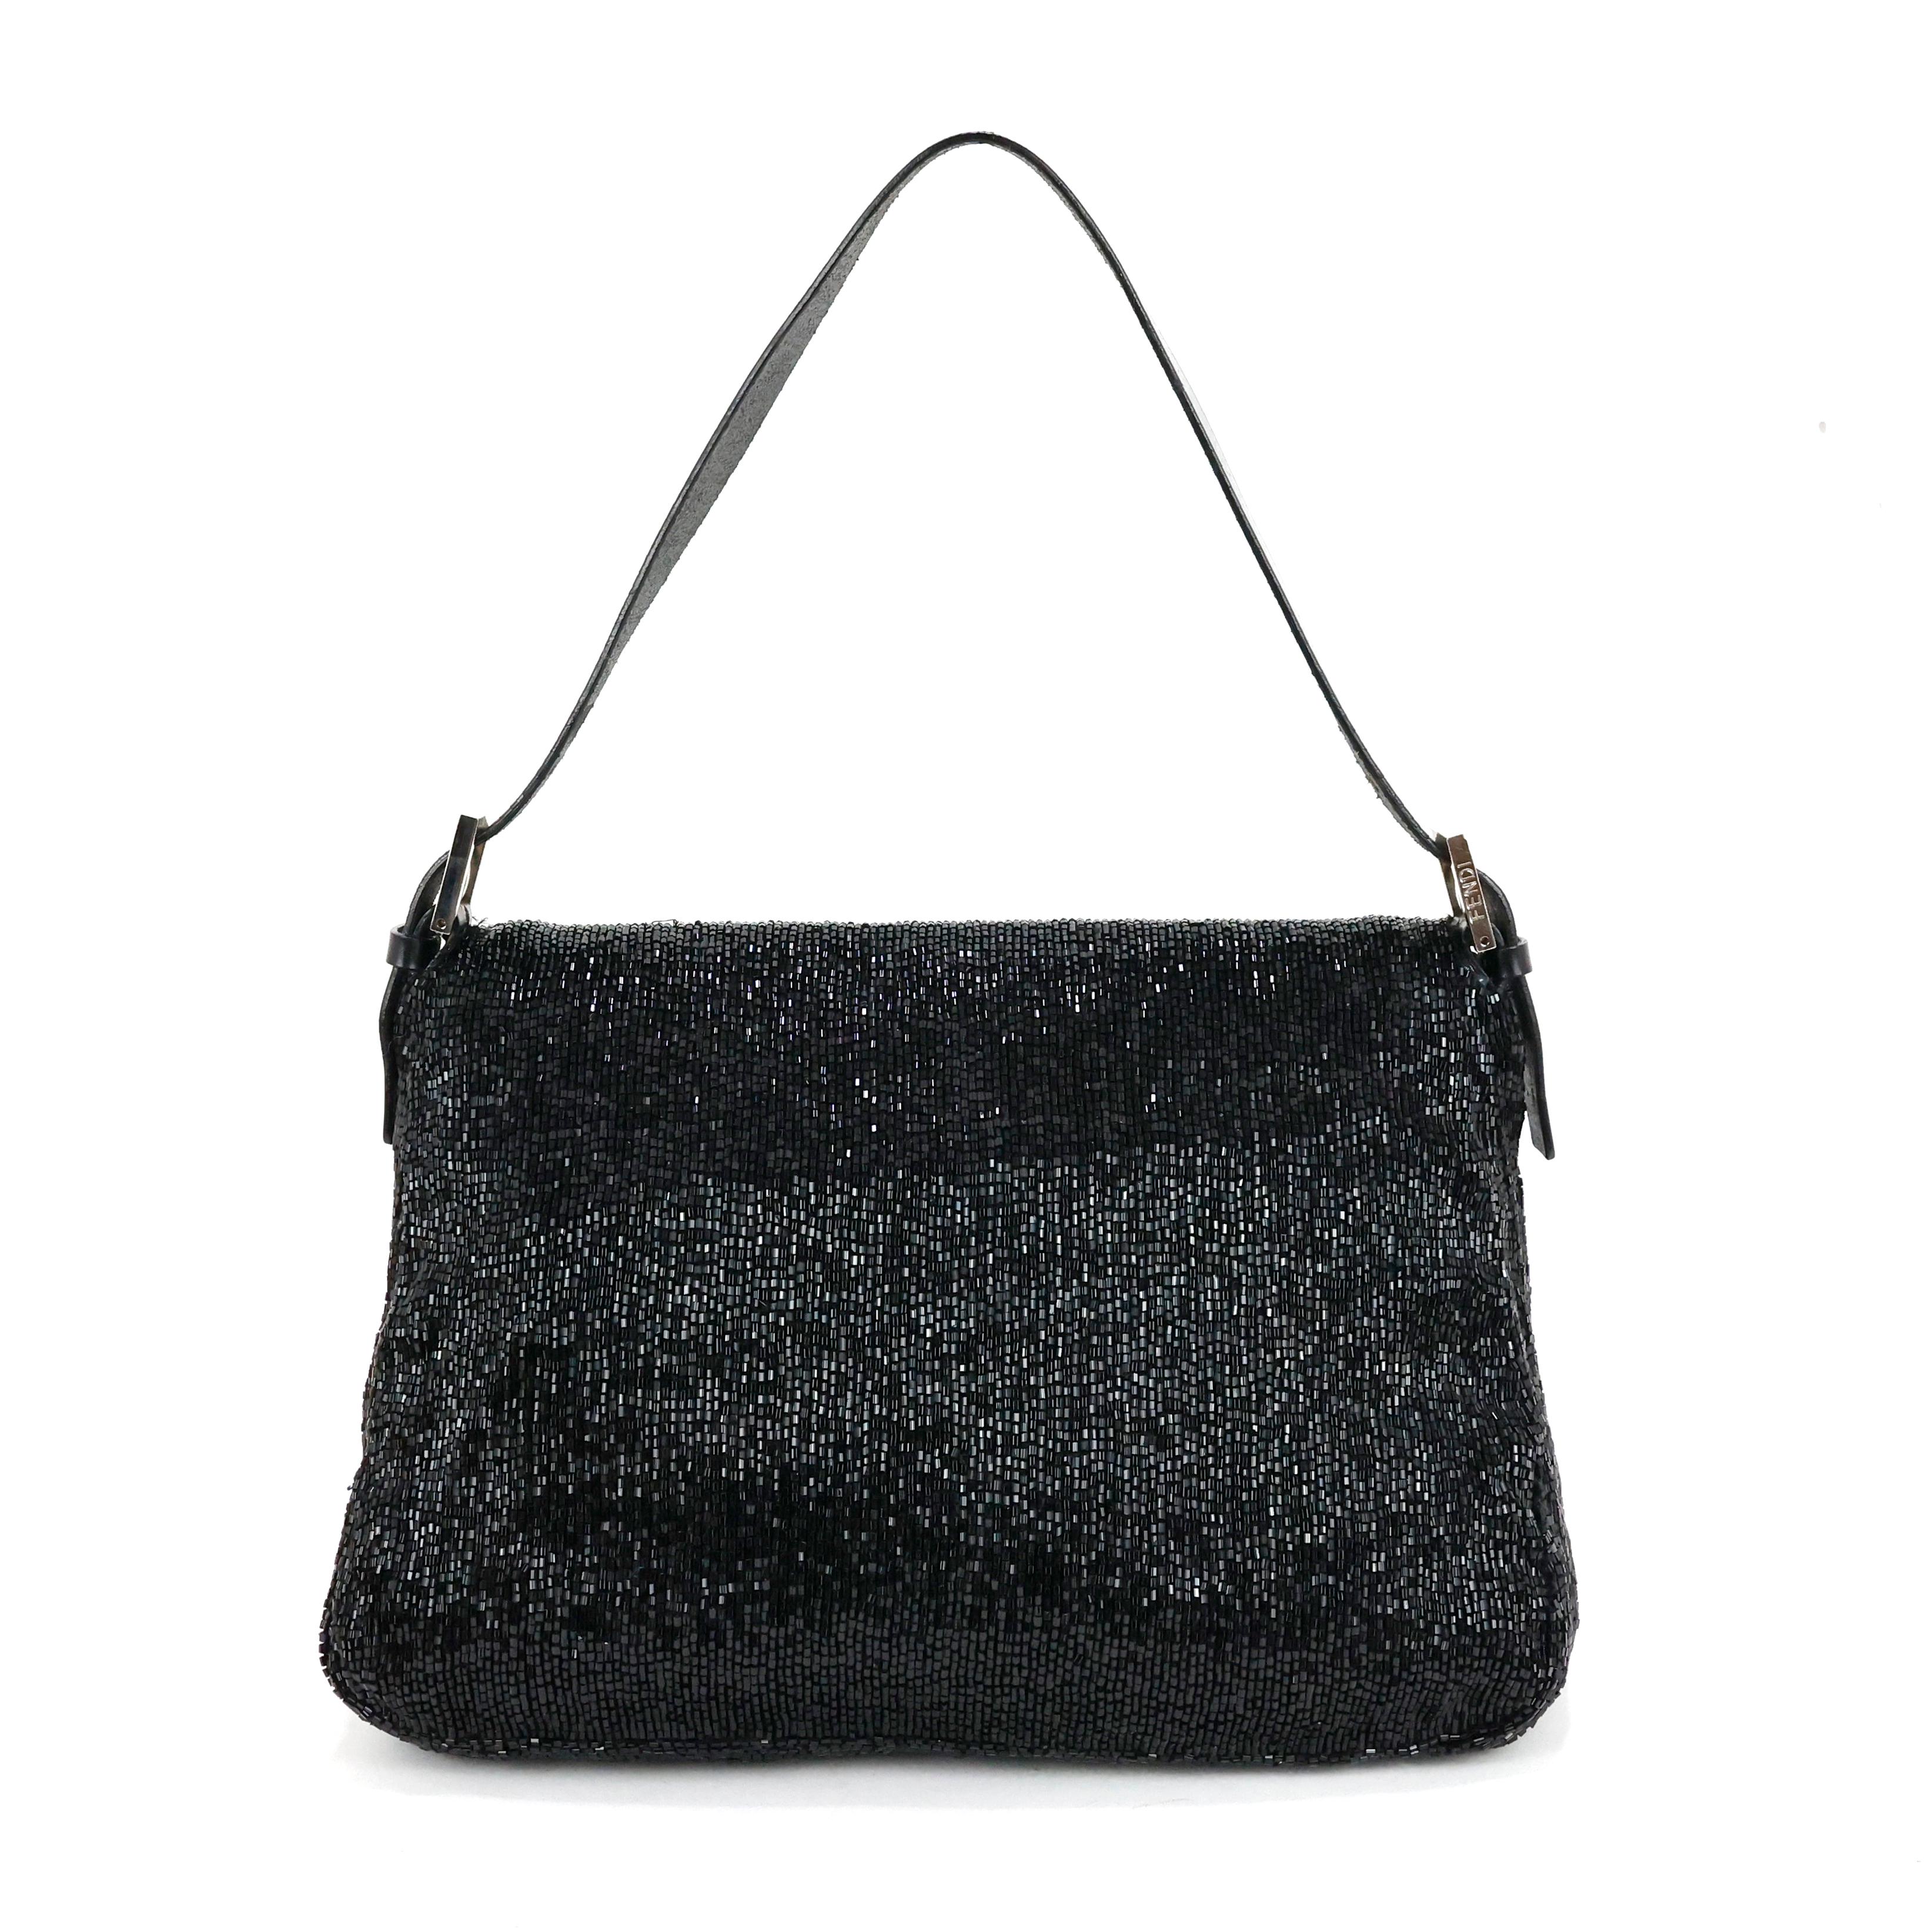 Fendi baguette, Mamma size, all over embroidered with micro stones + leather, black color, silver hardware.

Condition:
Really good.
 
Packaging/Accessories:
Dustbag.

Dimensions:
Width: 25cm
Height: 17cm
Depth: 7cm